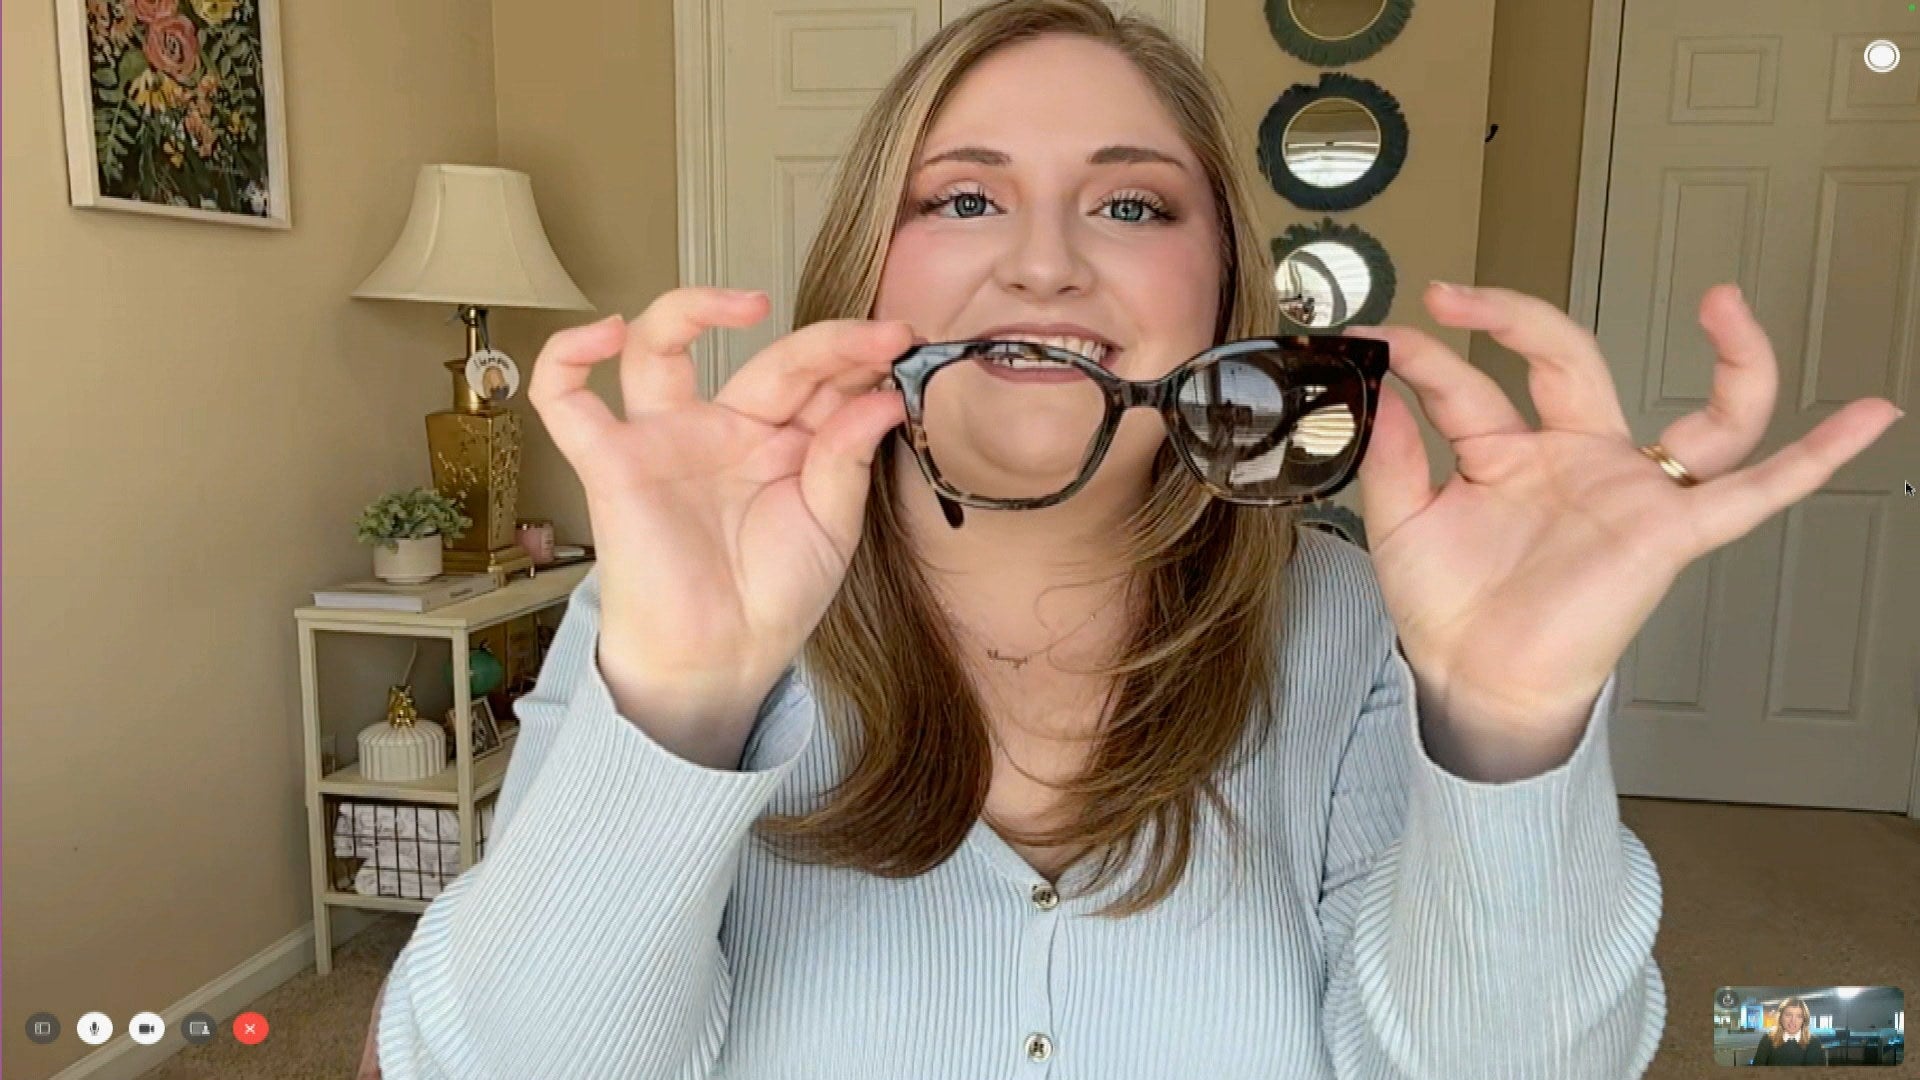 Woman Creates Shatter-Resistant Sunglasses After Losing Eye in